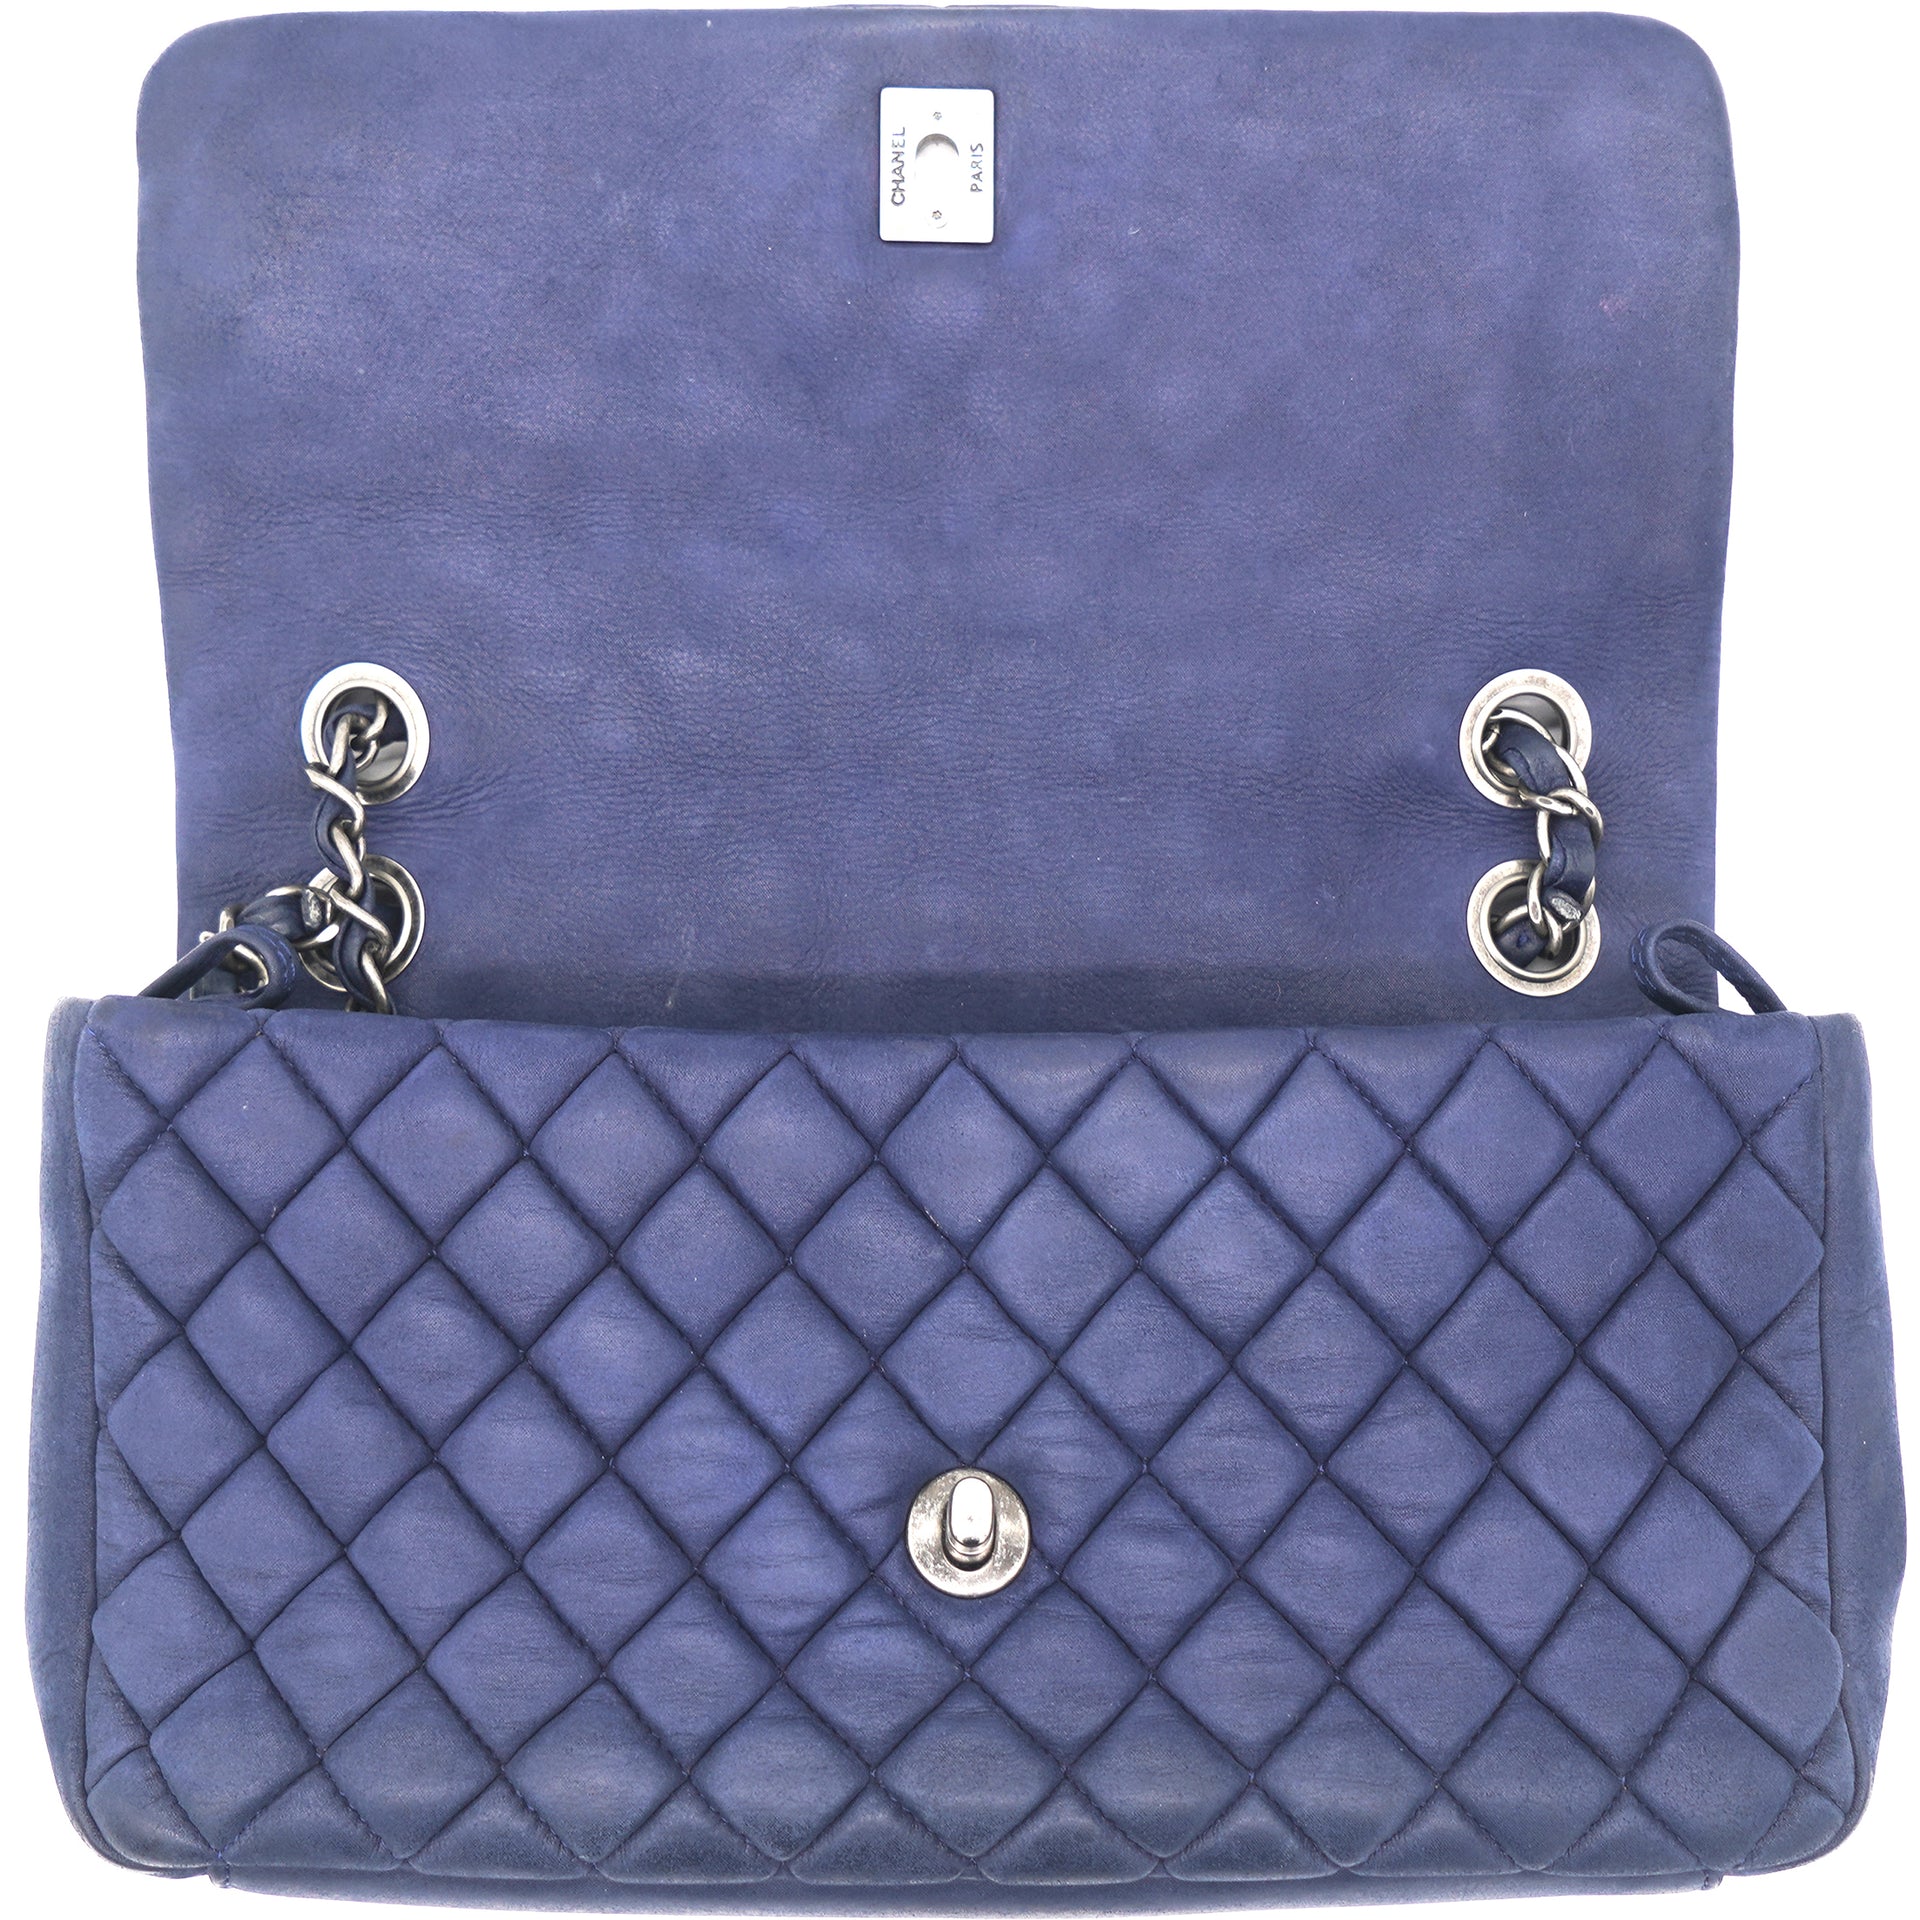 Blue Chanel Small Chic Pearls Flap Bag – Designer Revival